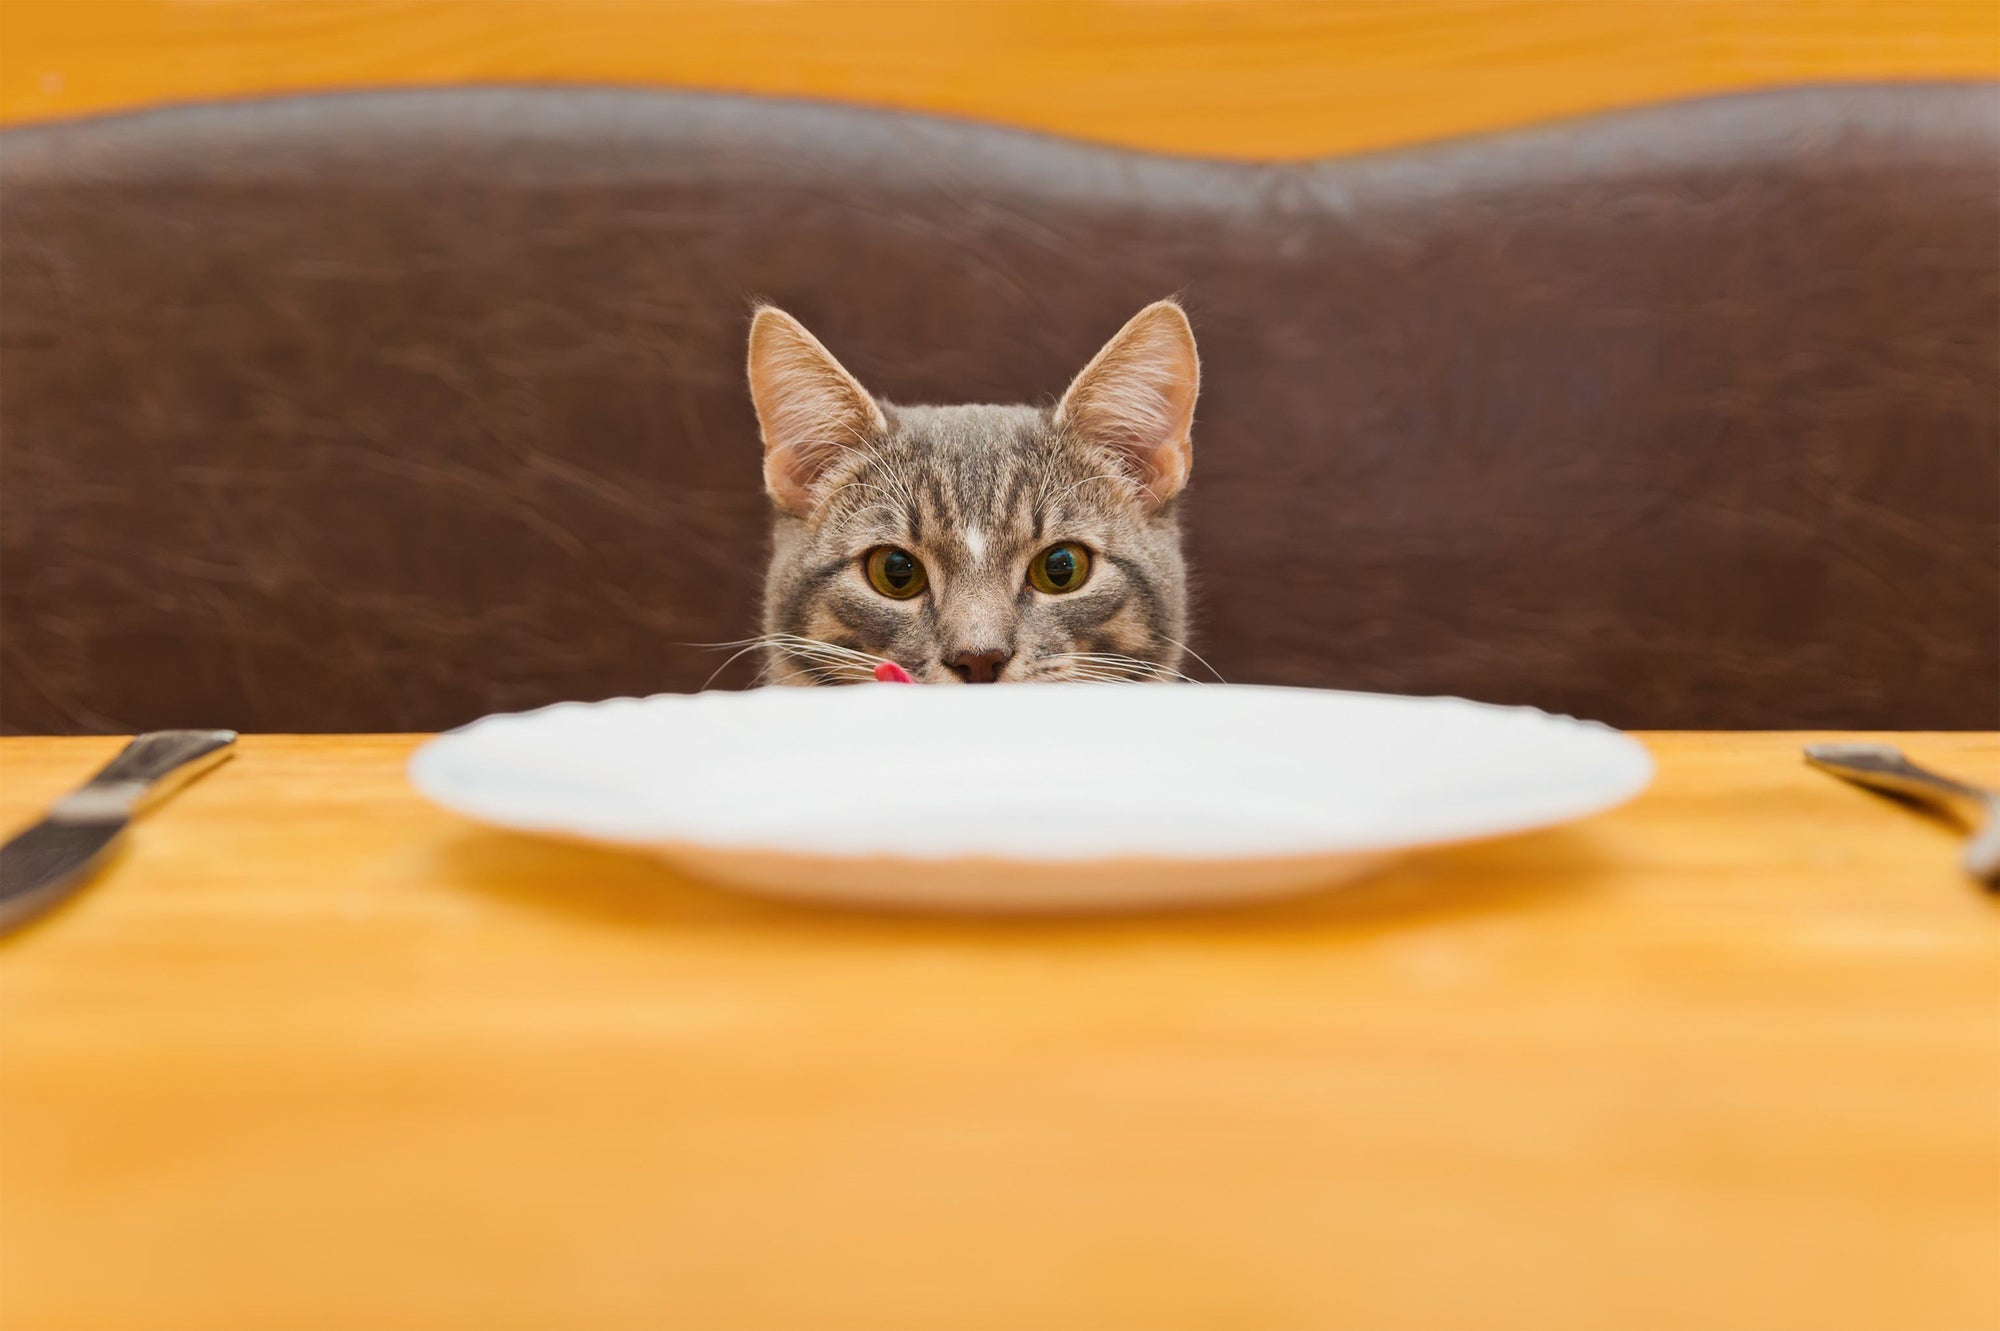 4 Things to Avoid Feeding Your Cat